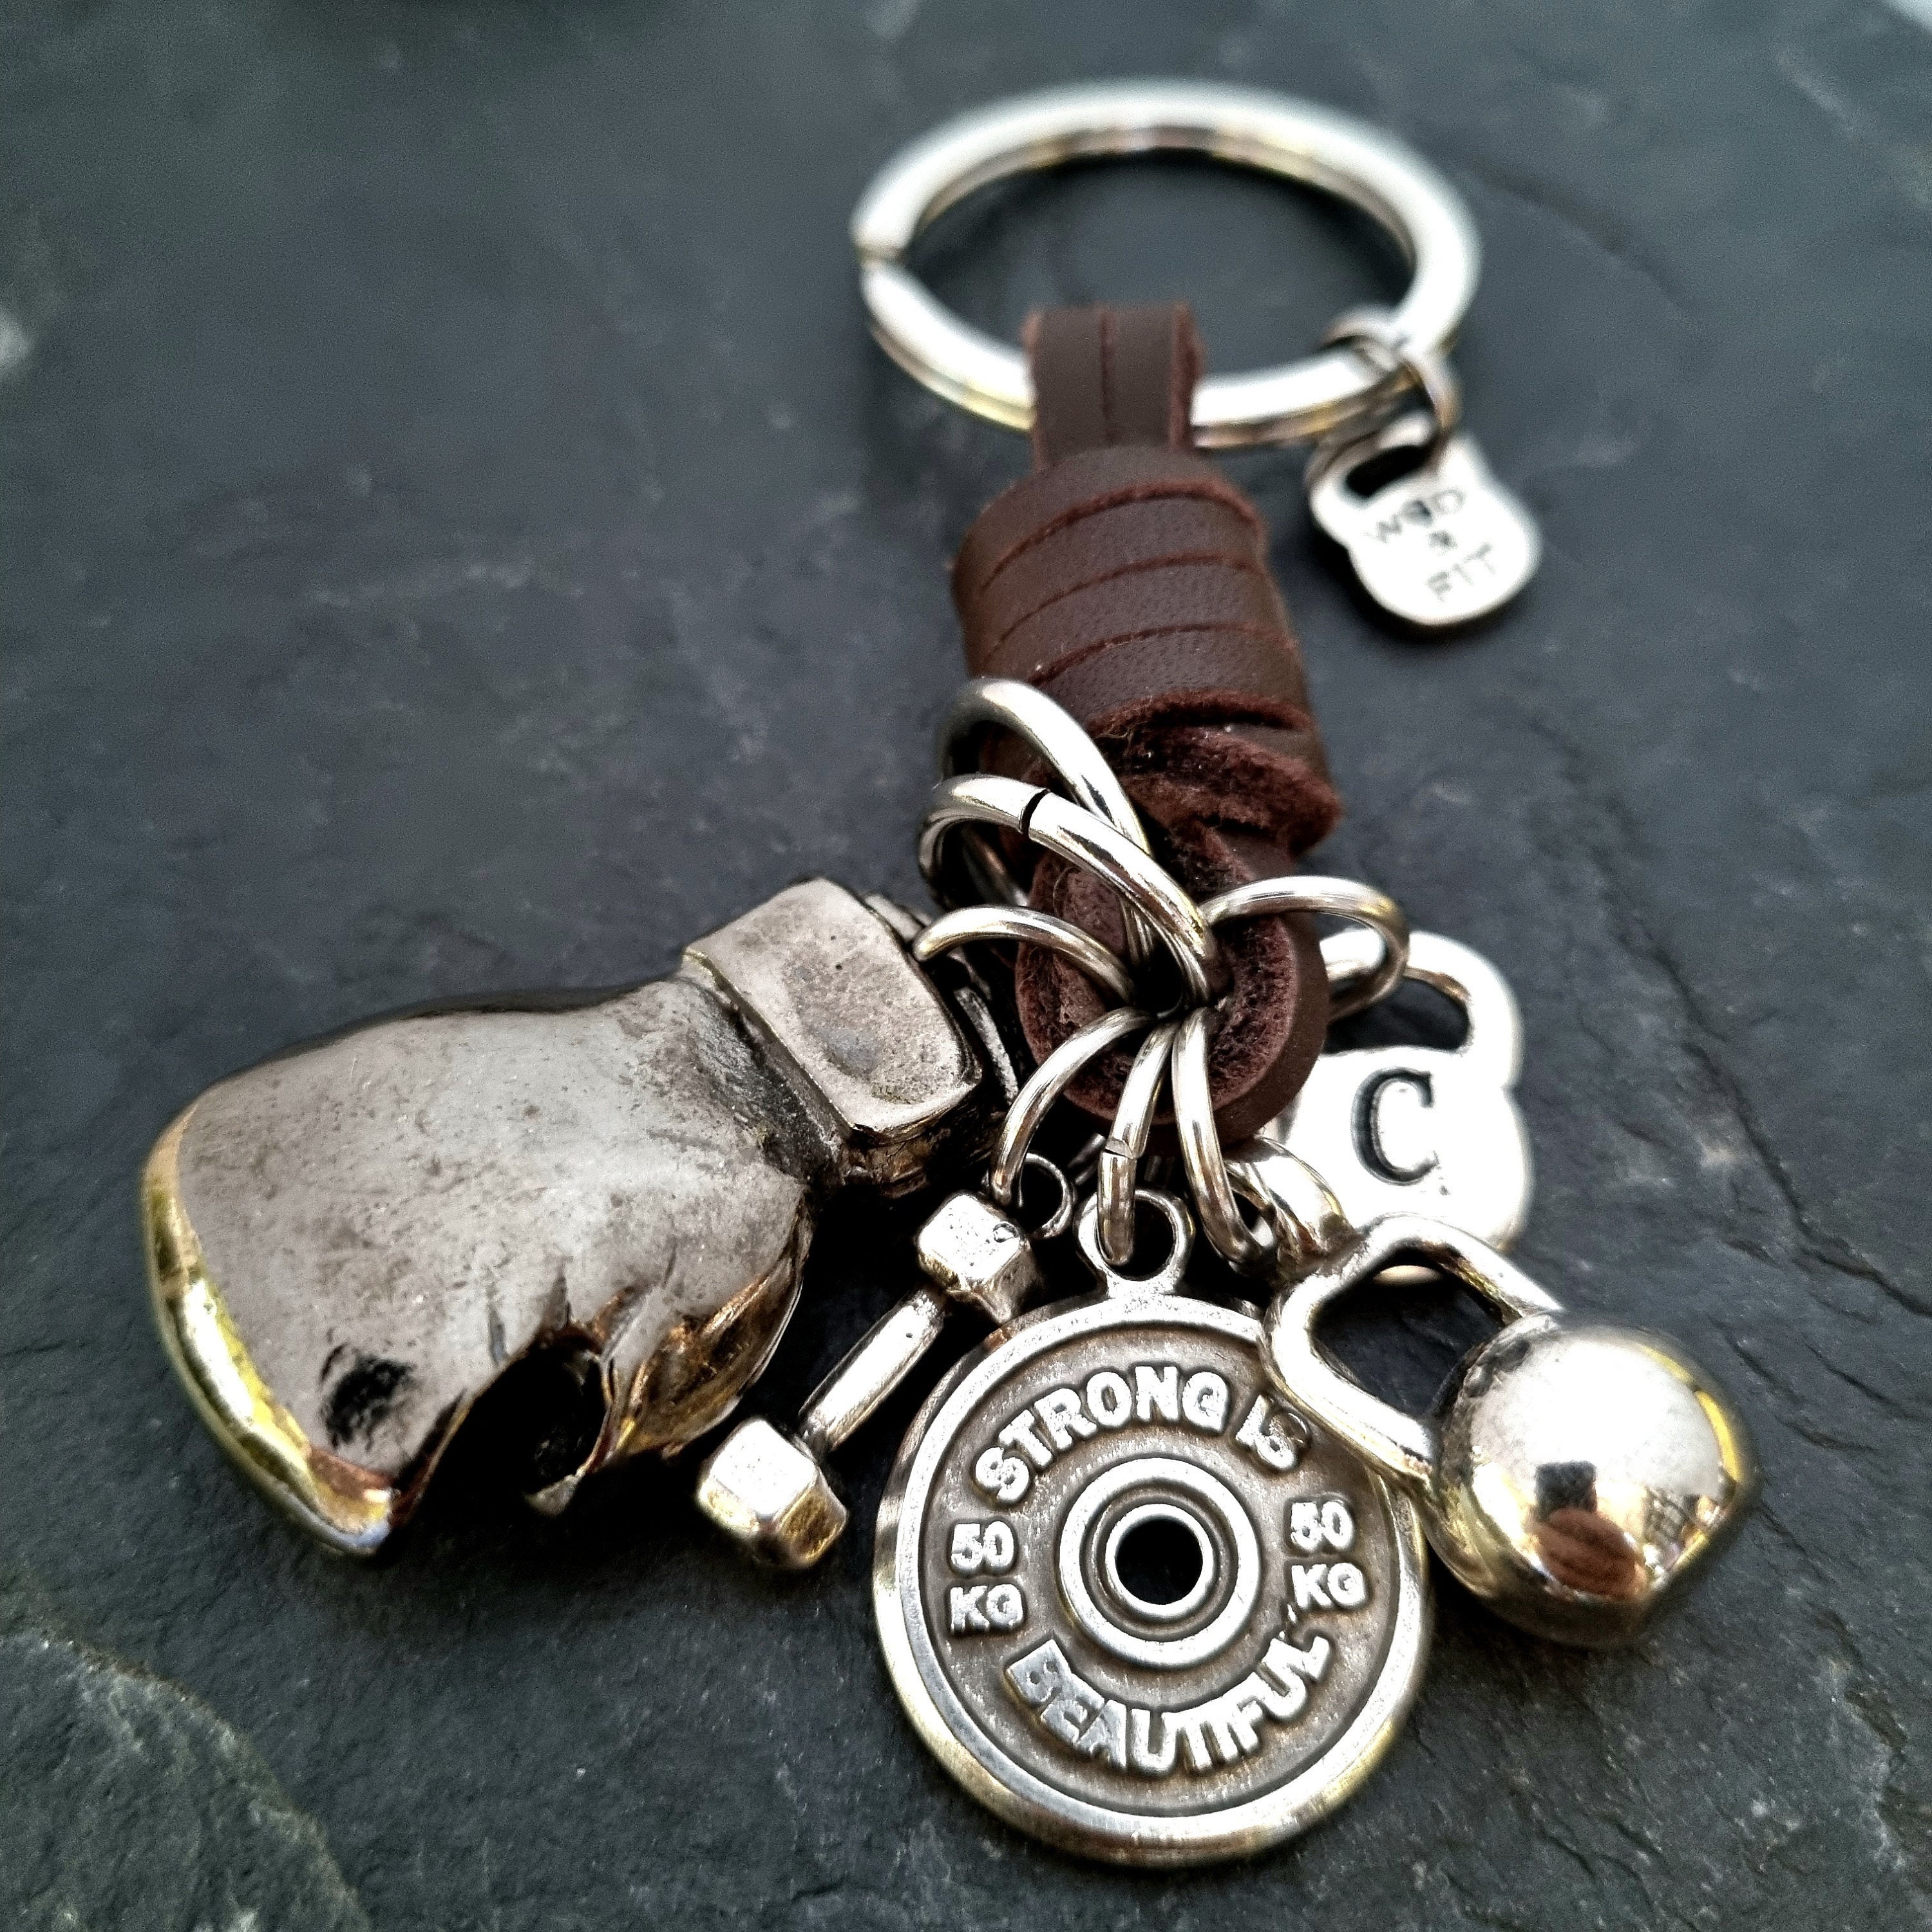 FEGVE Titanium Quick Release Swivel Keychain Key Keychain Clip with  Titanium Mini Quick Release Connecting Key Chain Rings